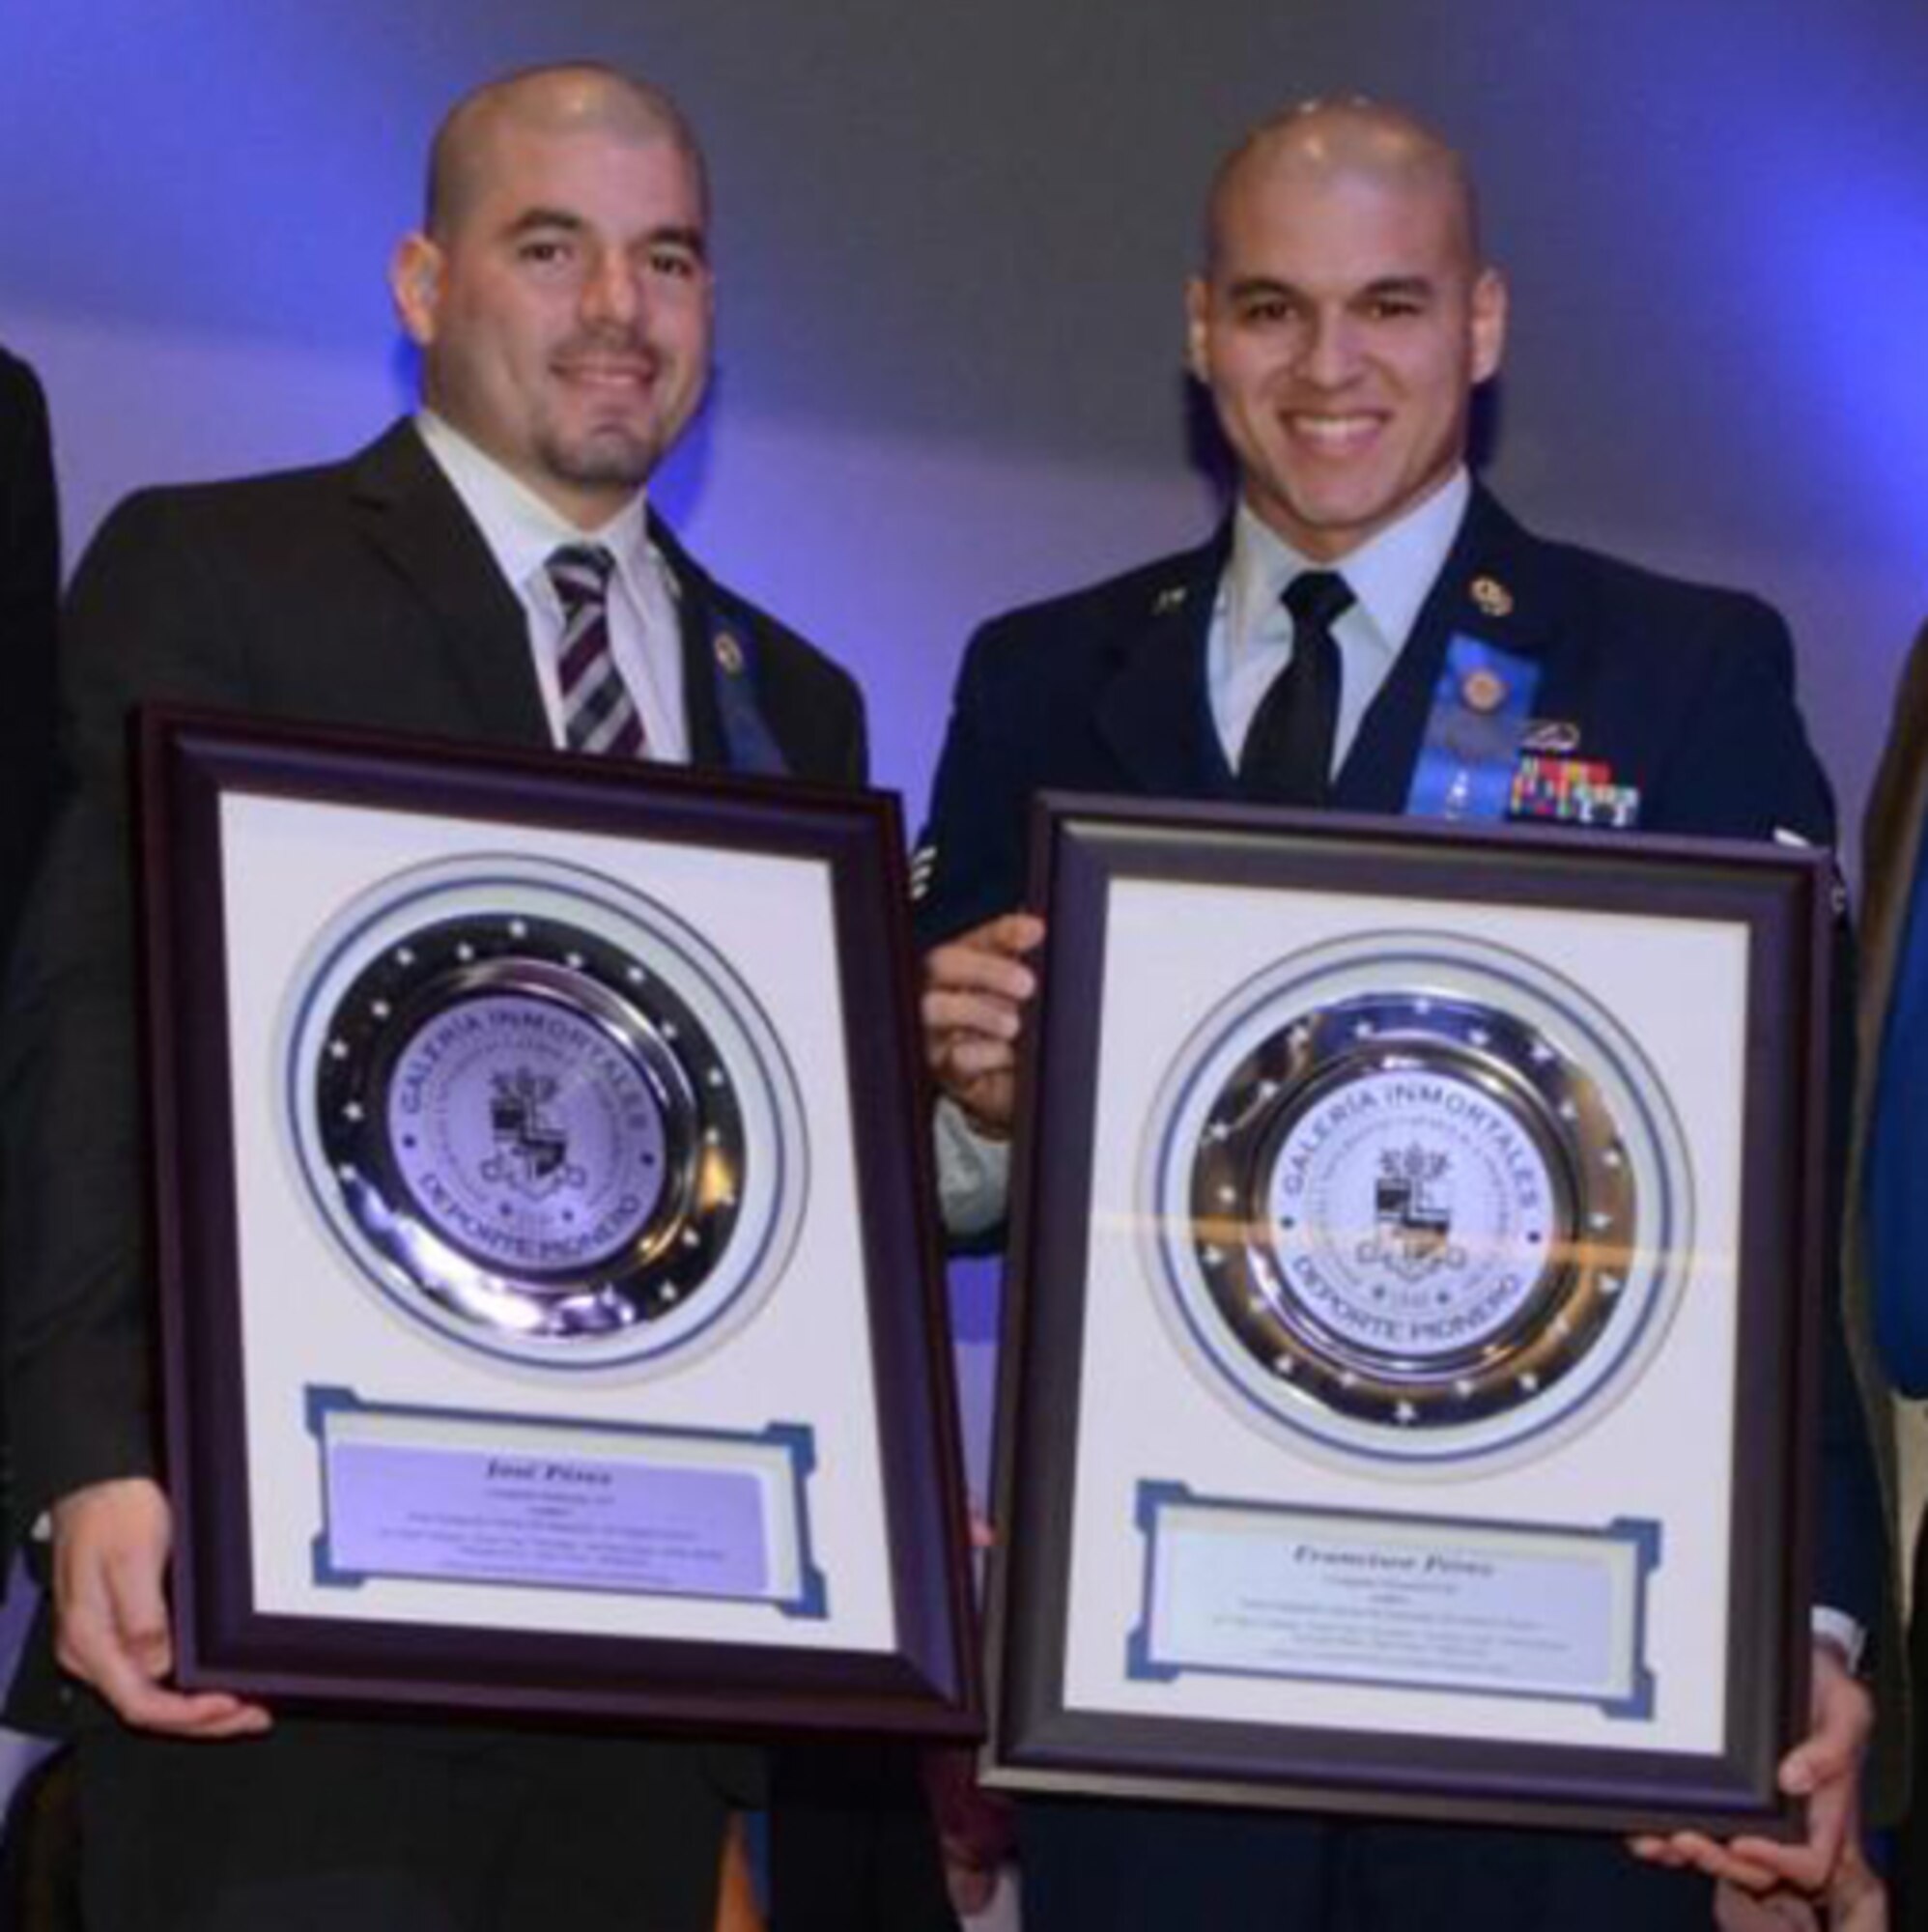 Senior Airman Francisco Perez Castillo, of the 96th Maintenance Group, right, and his brother, Jose, were both inducted into the Pontifical Catholic University of Puerto Rico’s sports hall of fame in December 2015. Perez Castillo and his brother swam competitively for their national and university teams while growing up. (Courtesy photo)